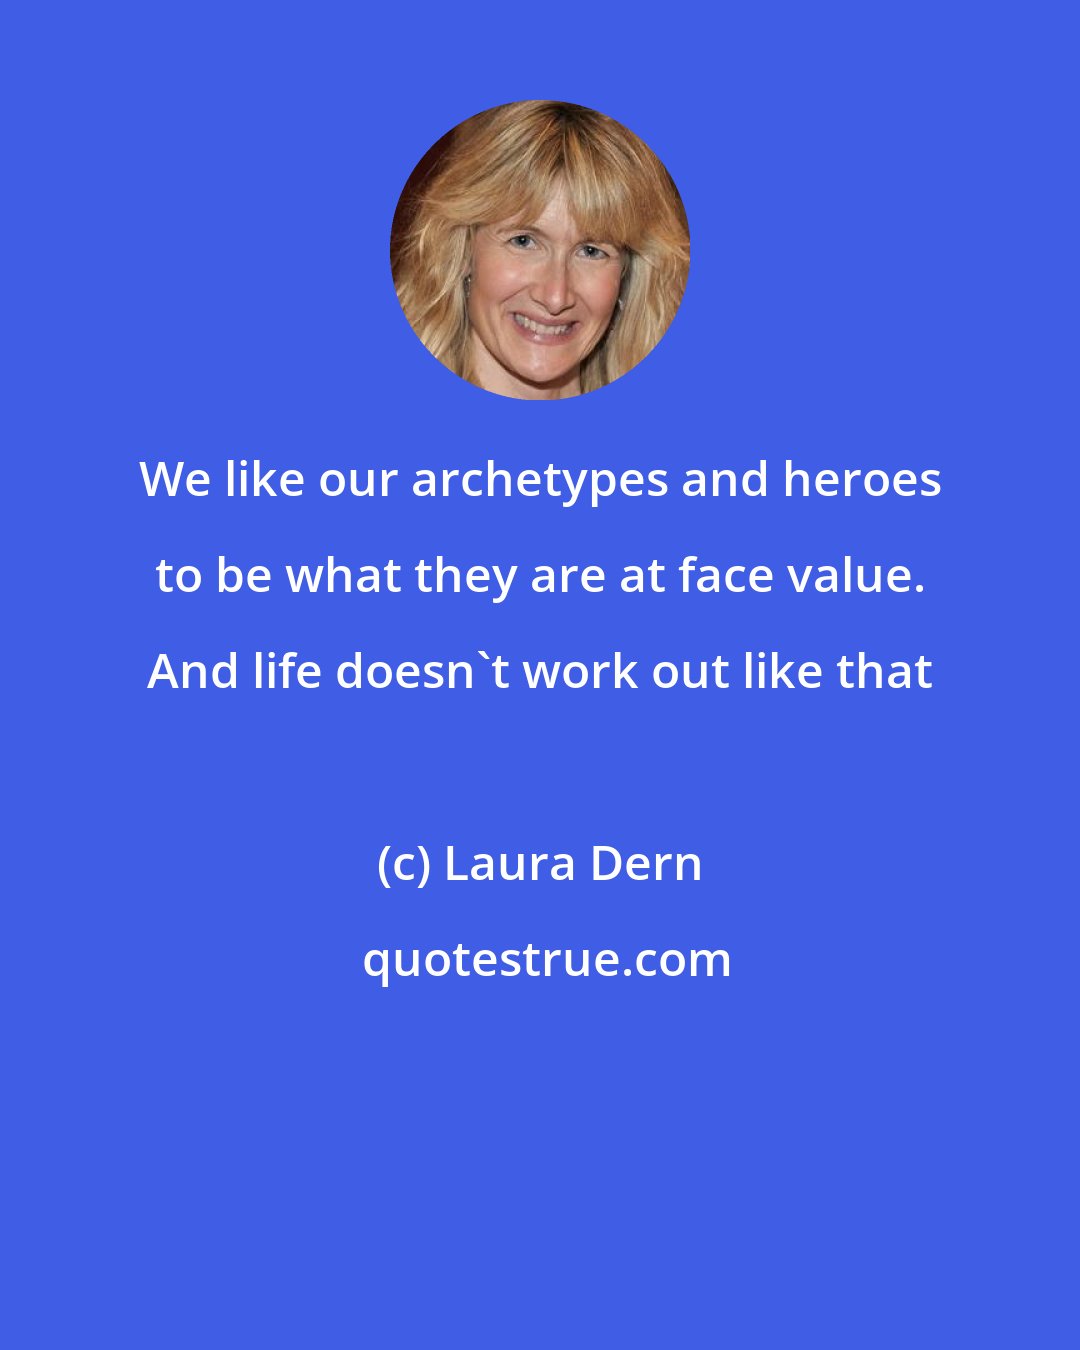 Laura Dern: We like our archetypes and heroes to be what they are at face value. And life doesn't work out like that